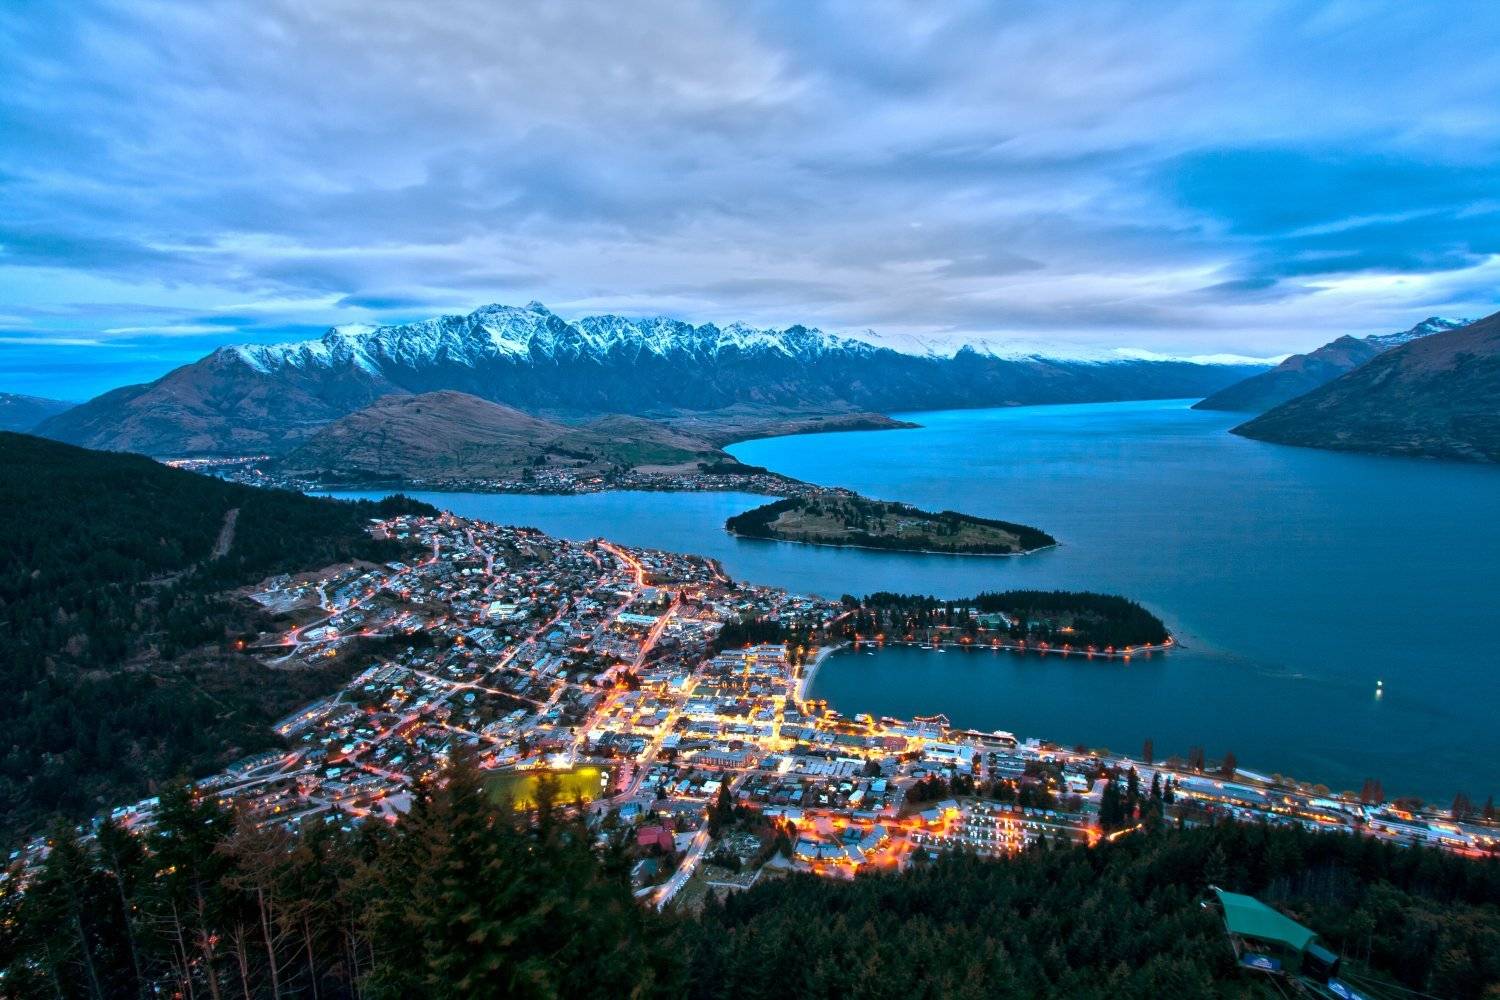 Aerial view of Queenstown New Zealand with lake and mountains in background